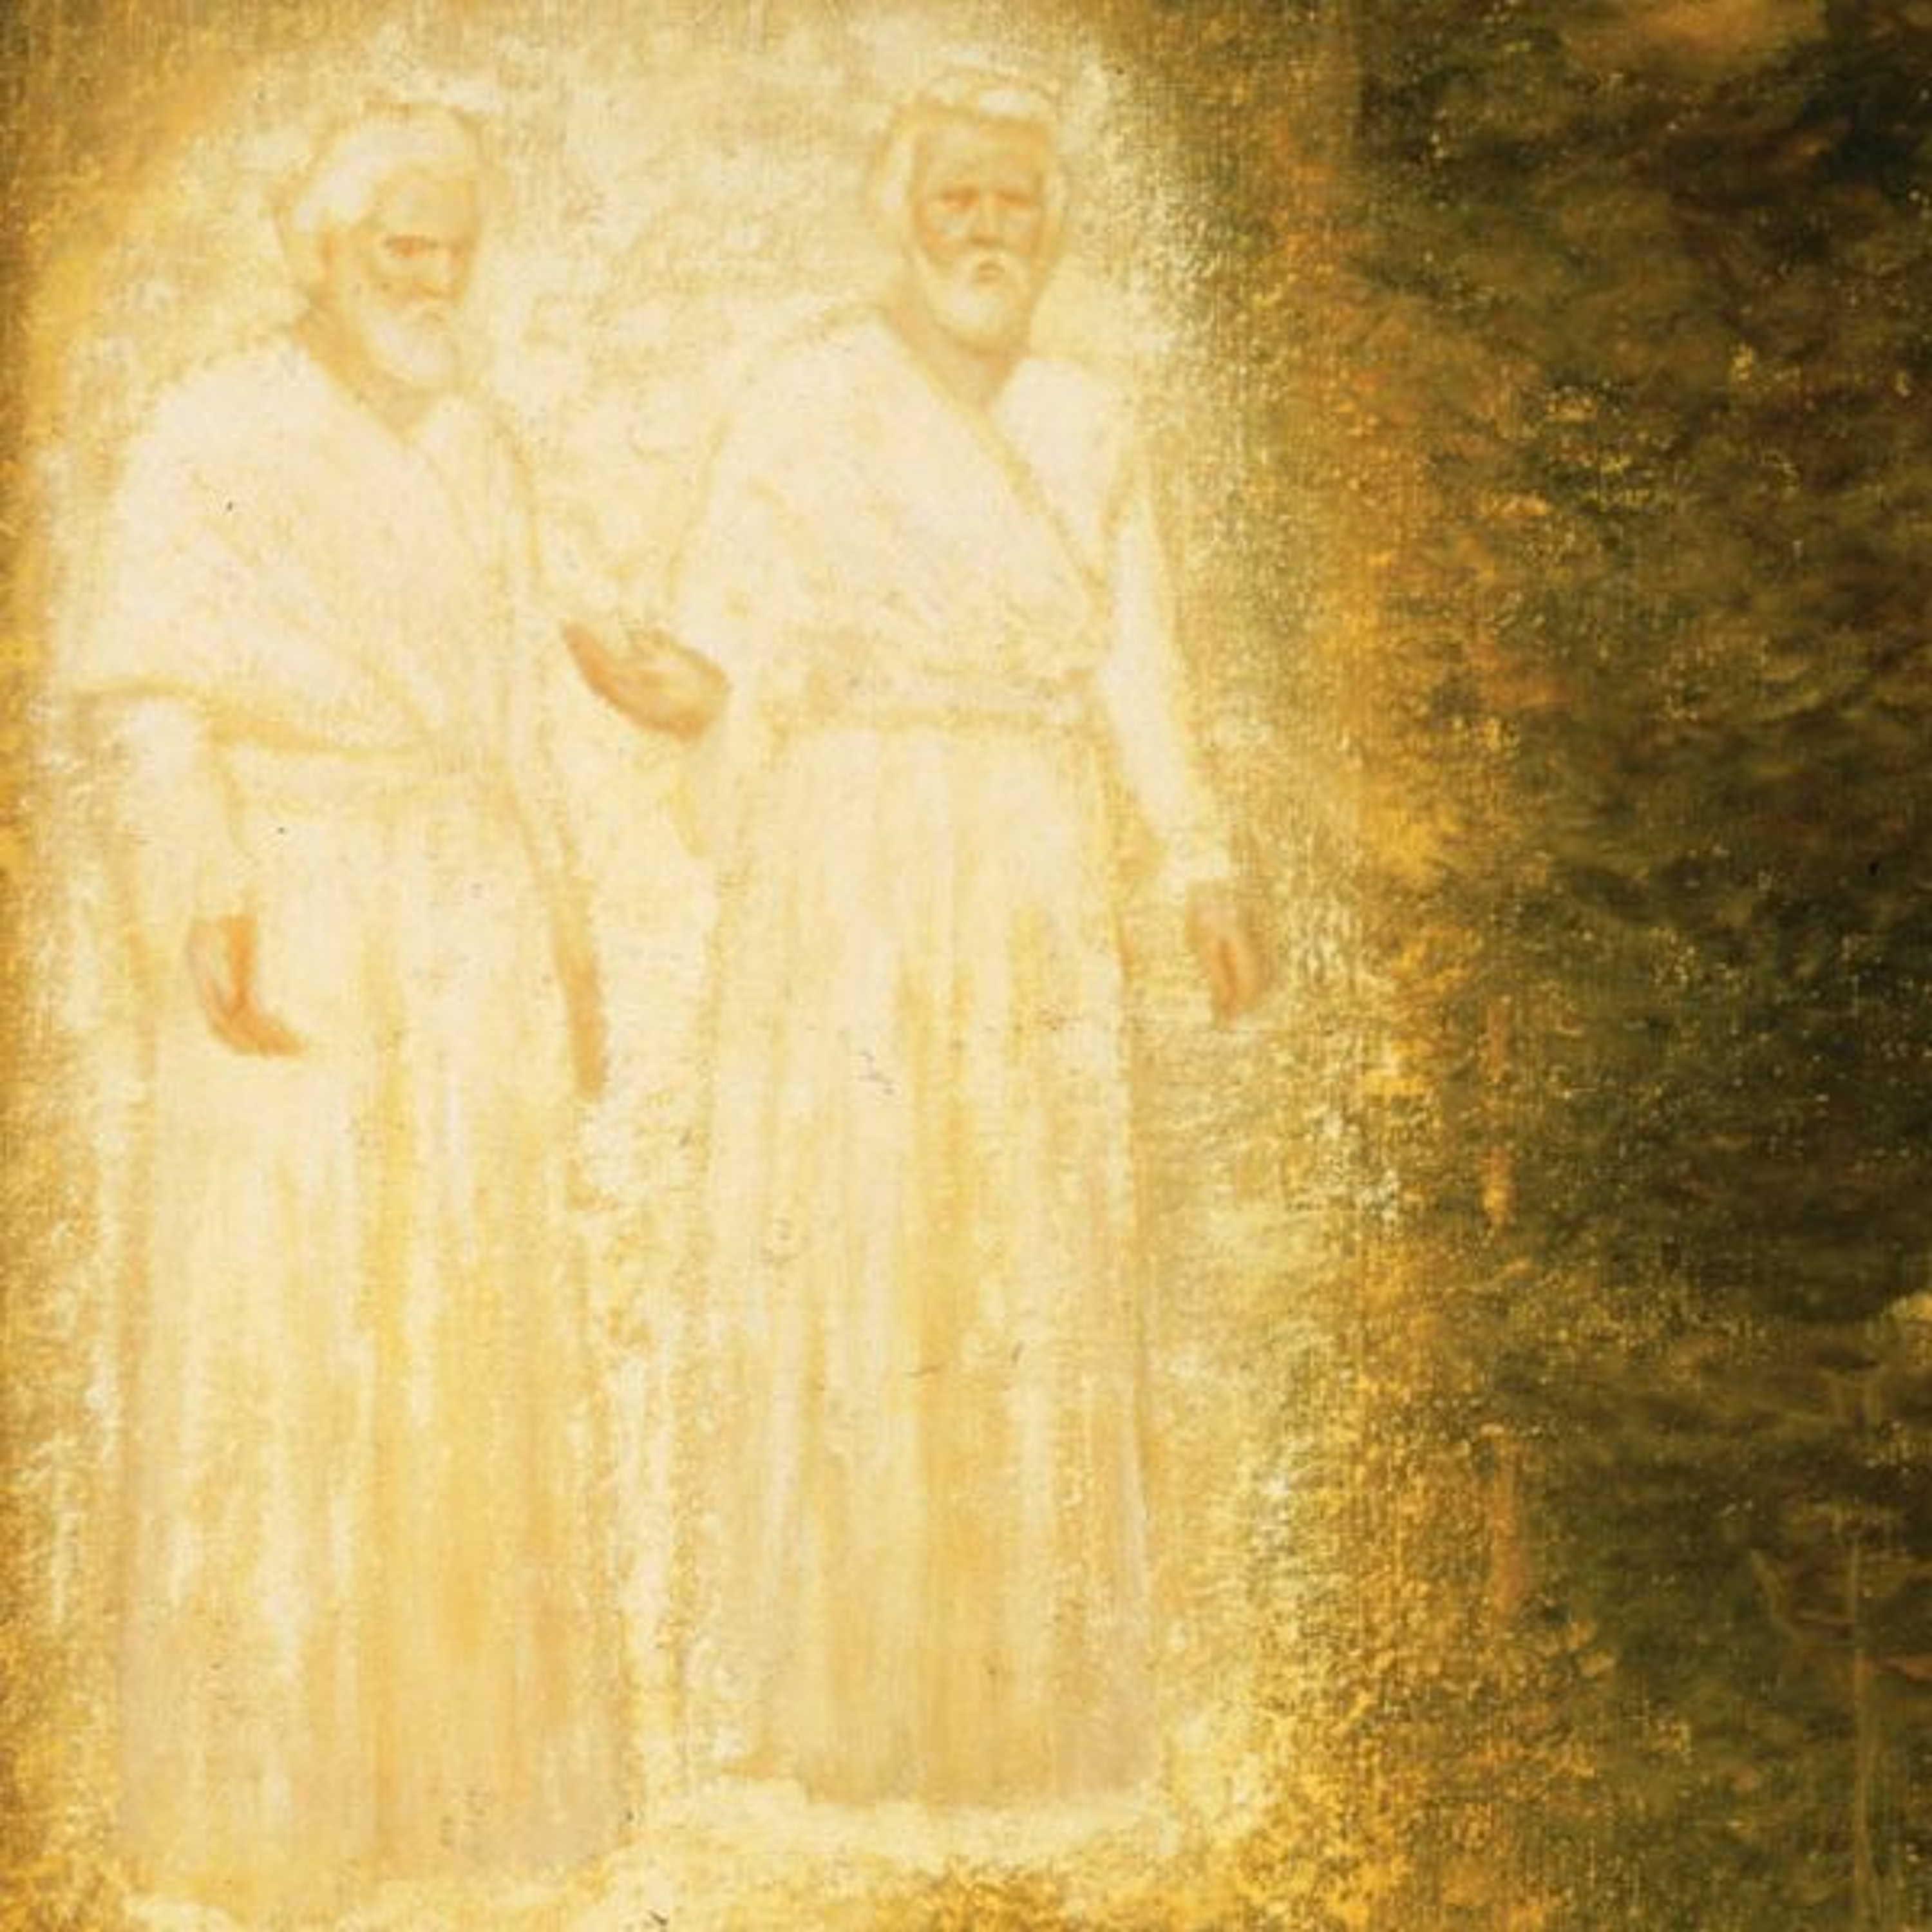 How Are The Book Of Mormon’s Teachings About The Godhead Unique? #266